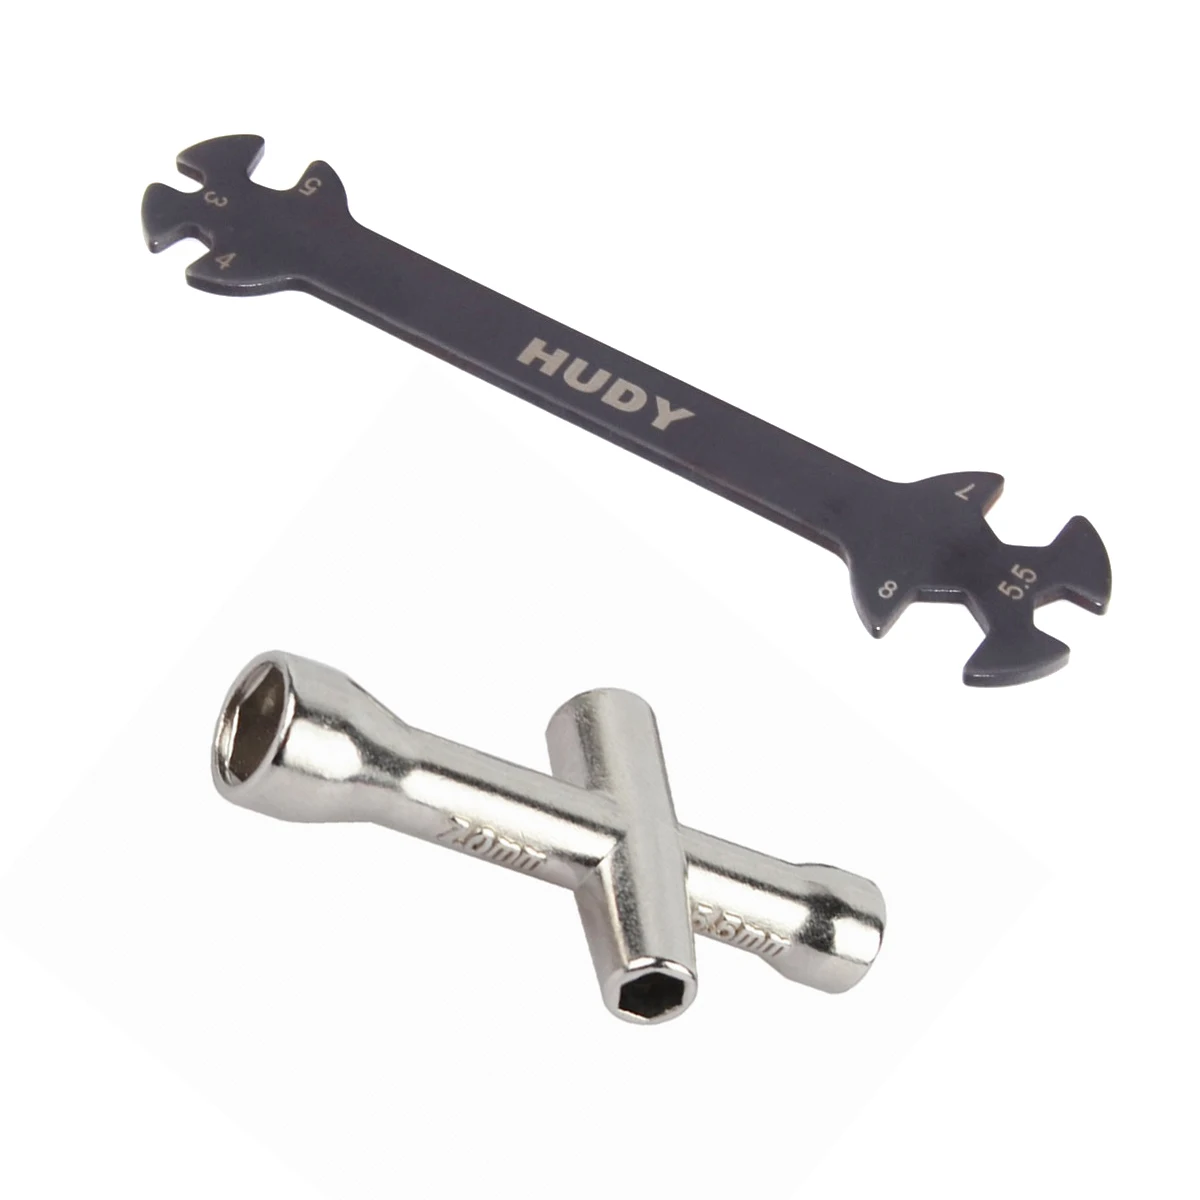 6 in 1 RC Wrench Tool 3/4/5/5.5/7/8MM Hex Socket Repair Tool for HSP Traxxas Trx4 Tamiya HPI Kyosho D90 Axial SCX10 Arrma